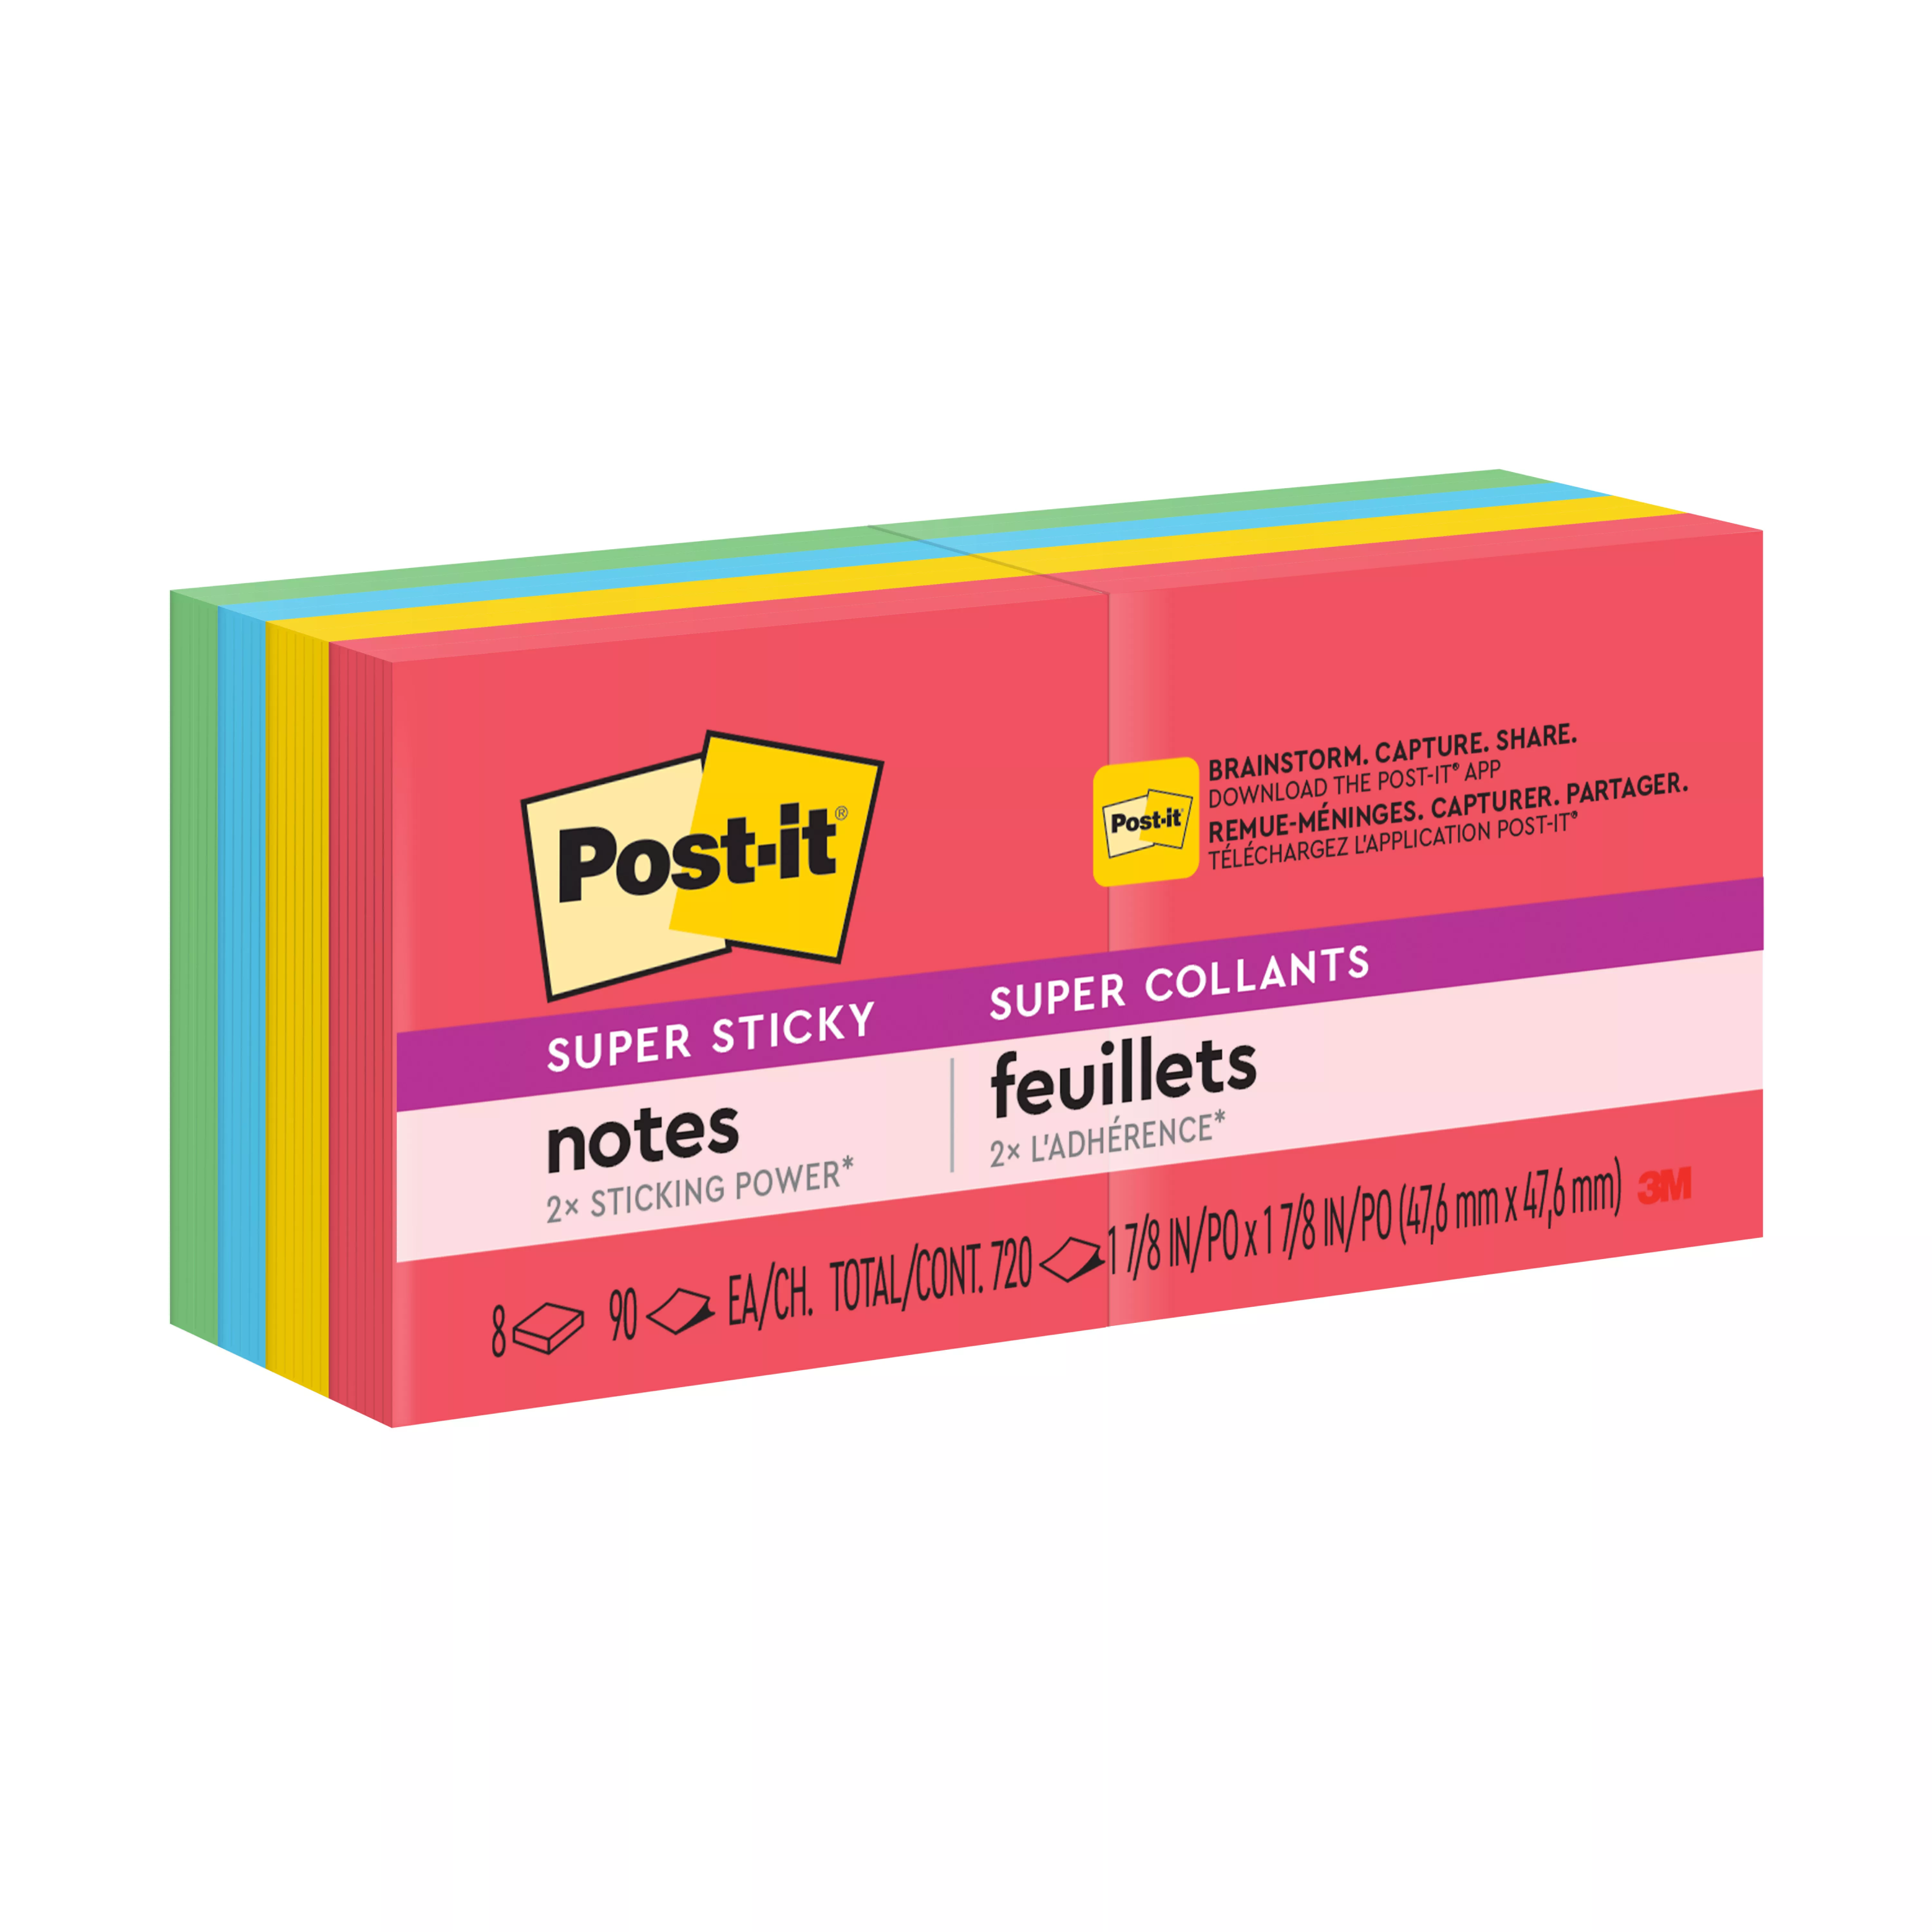 Post-it® Super Sticky Notes 622-8SSAN, 1.8 in x 1.8 in (47.6 mm x 47.6 mm), Playful Primaries Collection